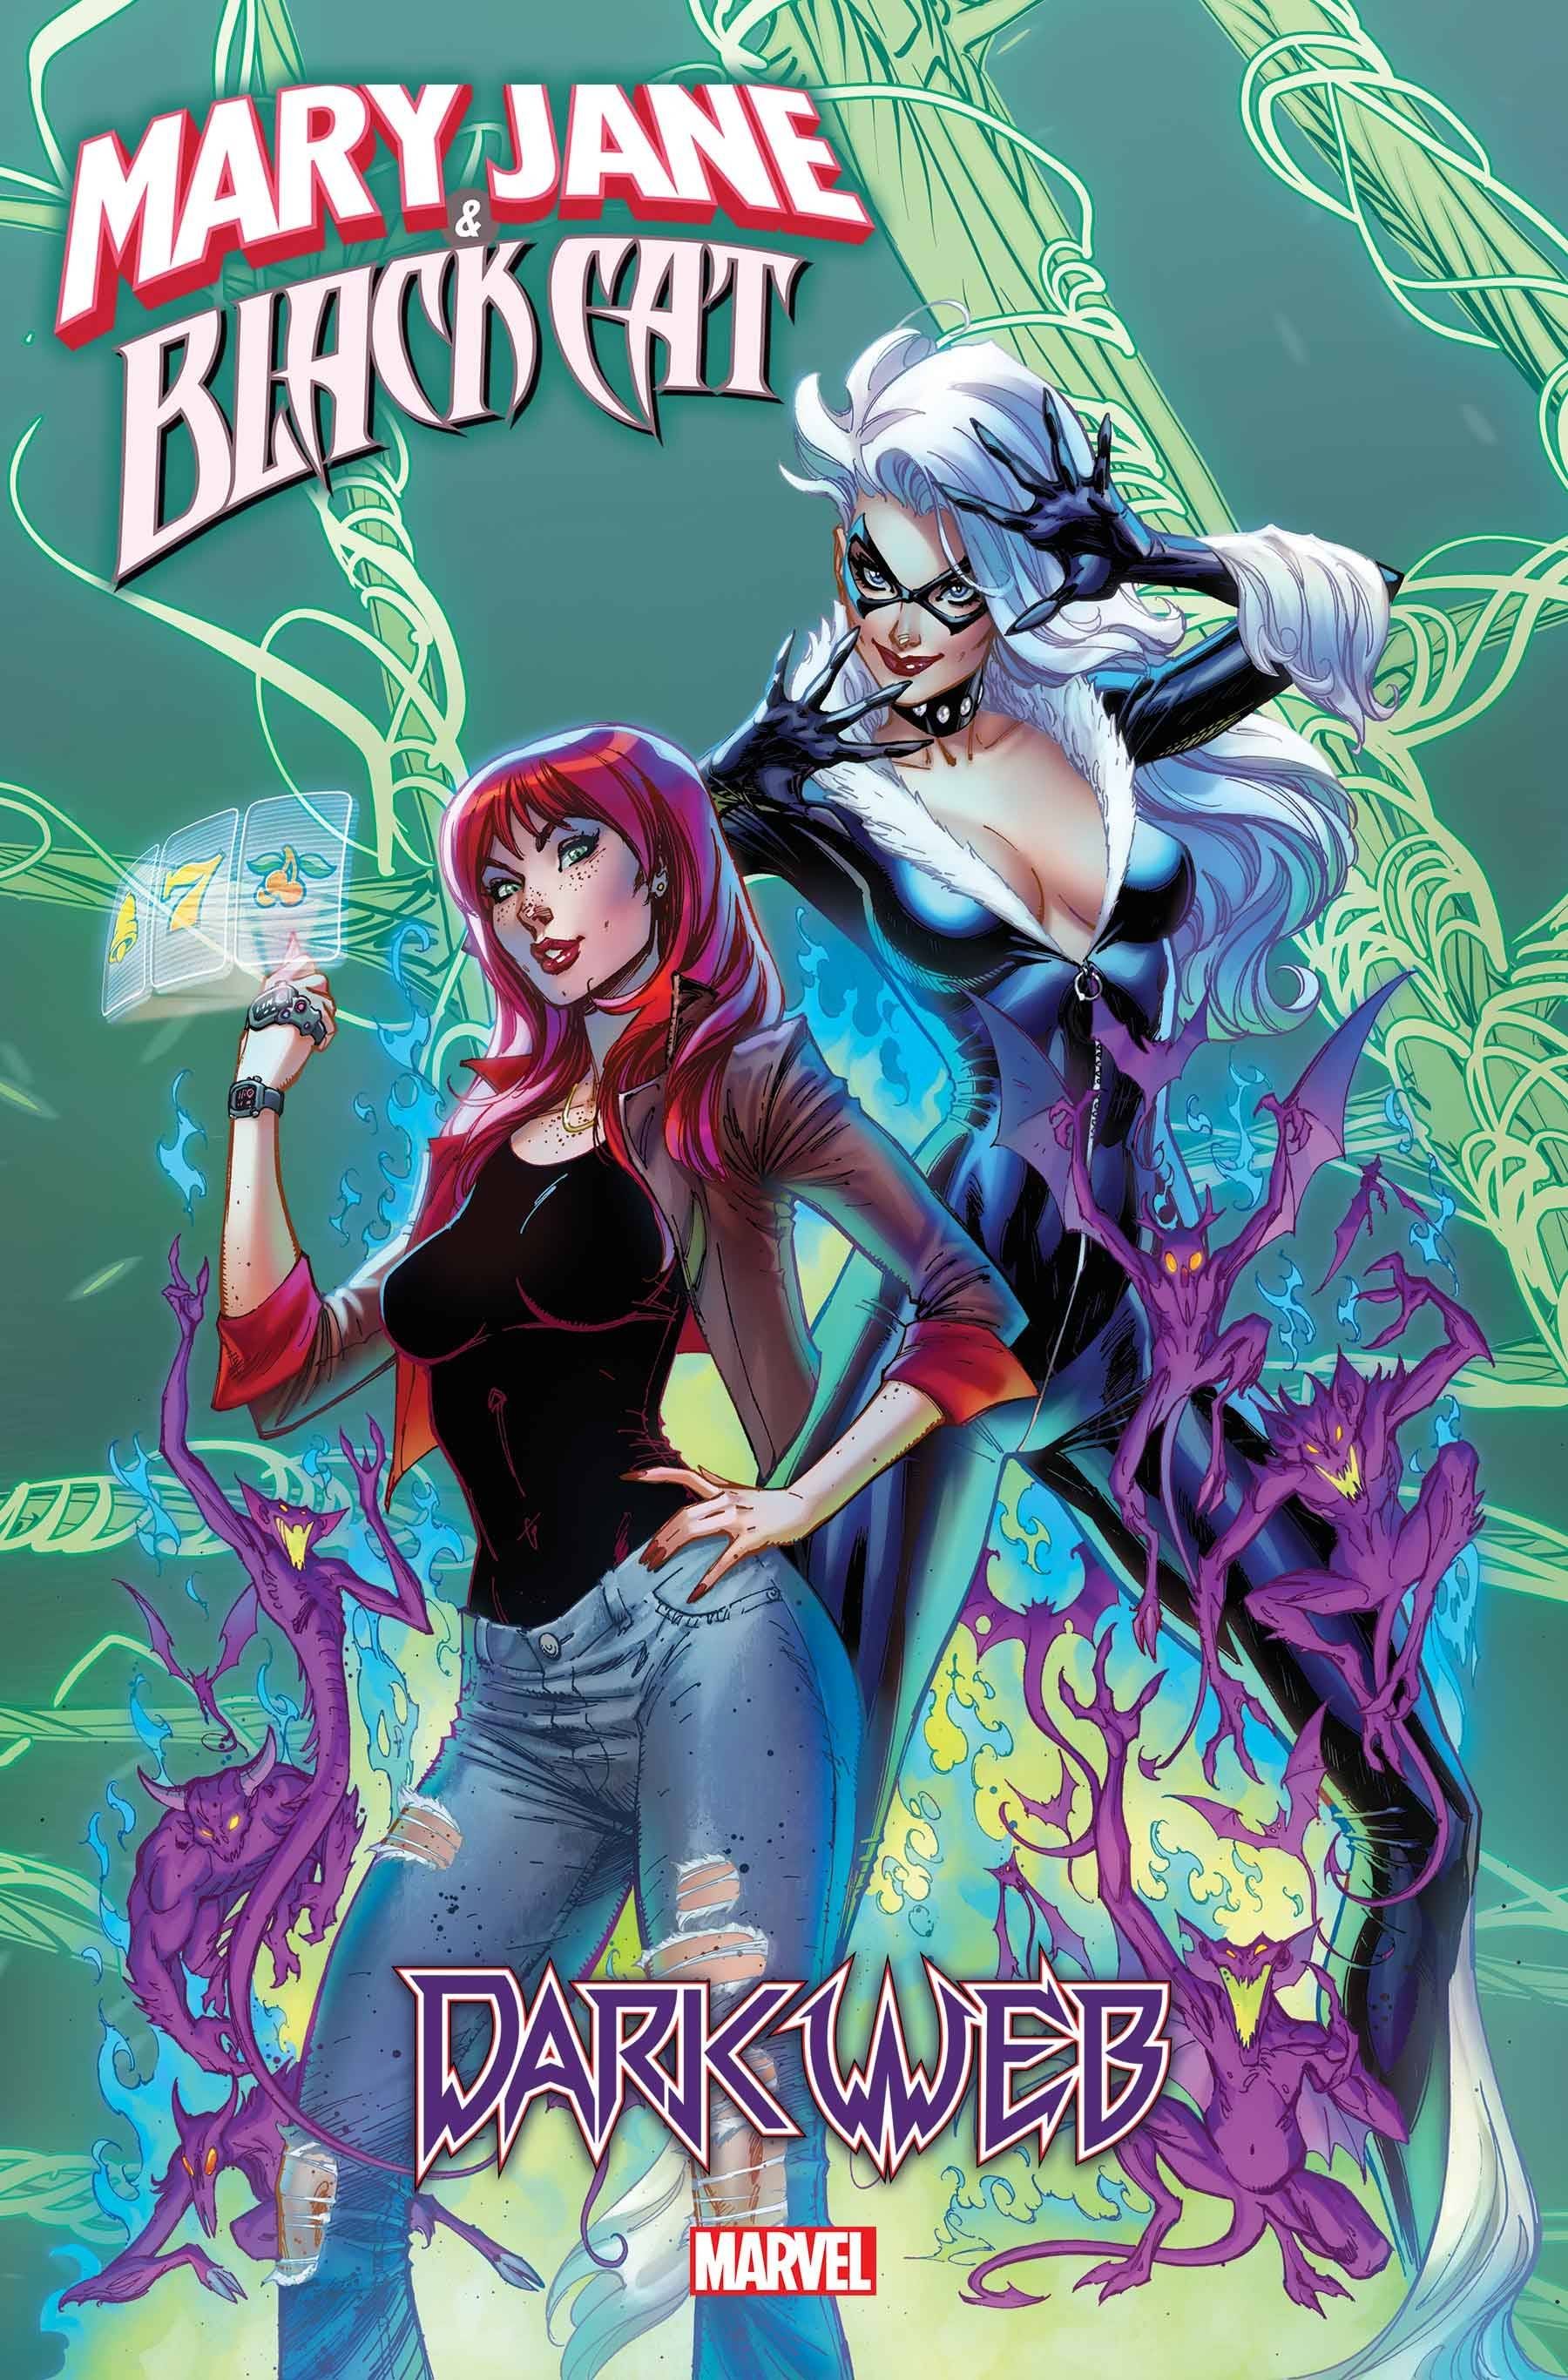 Mary Jane and the Black Cat #1